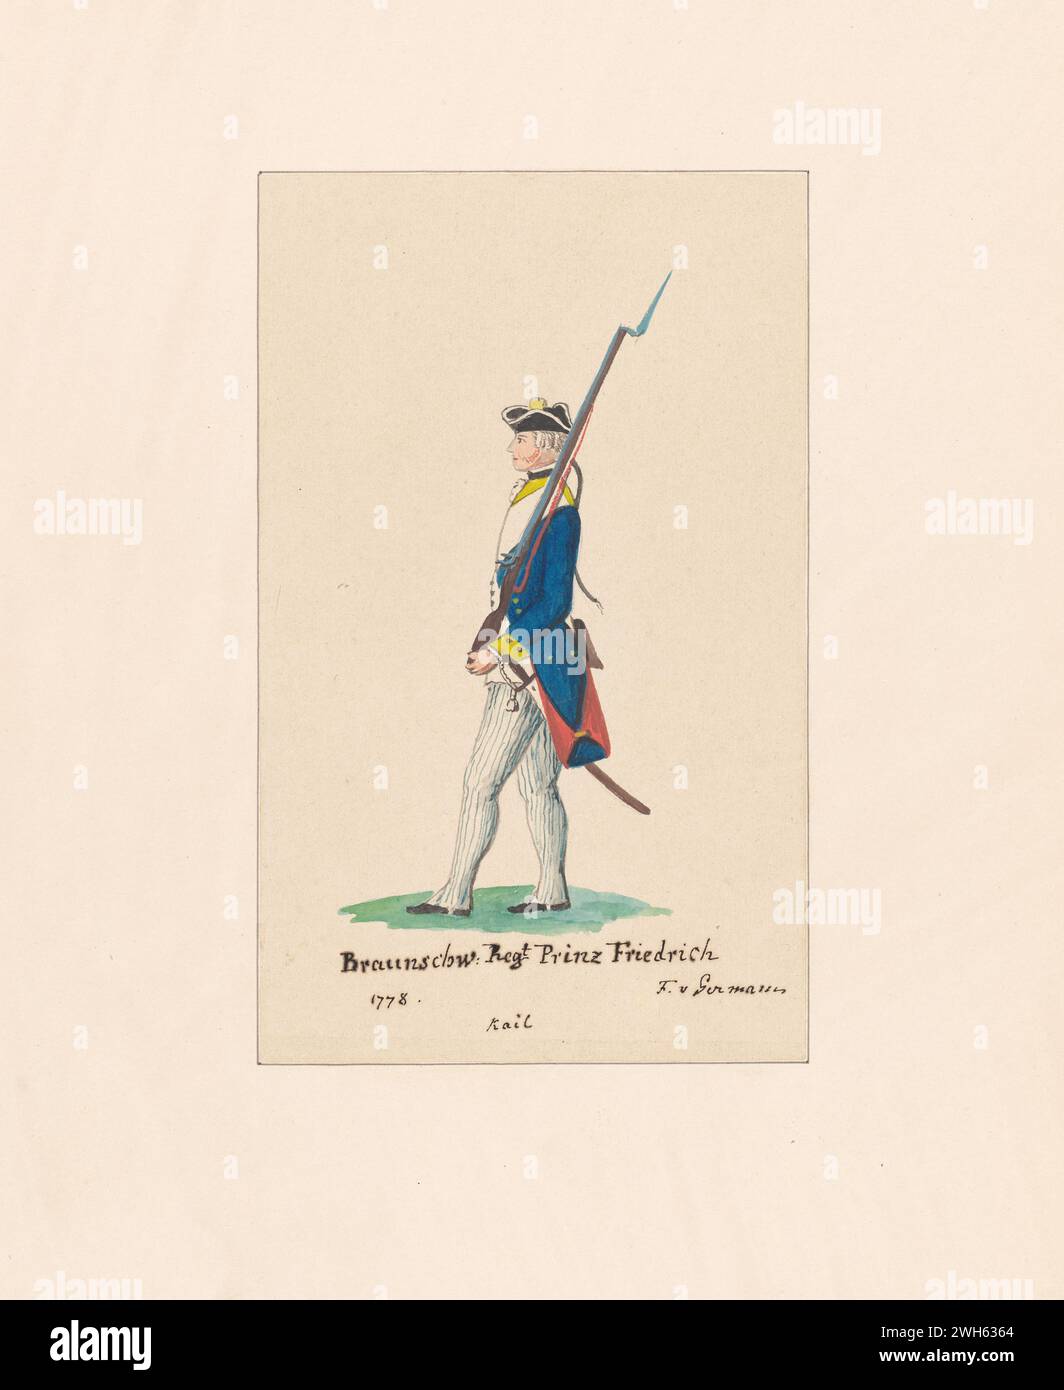 “Watercolor of a Soldier from the “Musketeer Regiment Prinz Friedrich”  in the Brunswick (Braunschweig) Corps during the American Revolutionary War” circa 1778.    From a series of prints by Friedrich von German captain of a regiment from Hesse-Hanau, one of the many German auxiliary troops hired by George III to fight in the American Revolution. He arrived in North America in 1775 During the war, he painted a series of watercolors of American, British, and German soldiers. Stock Photo